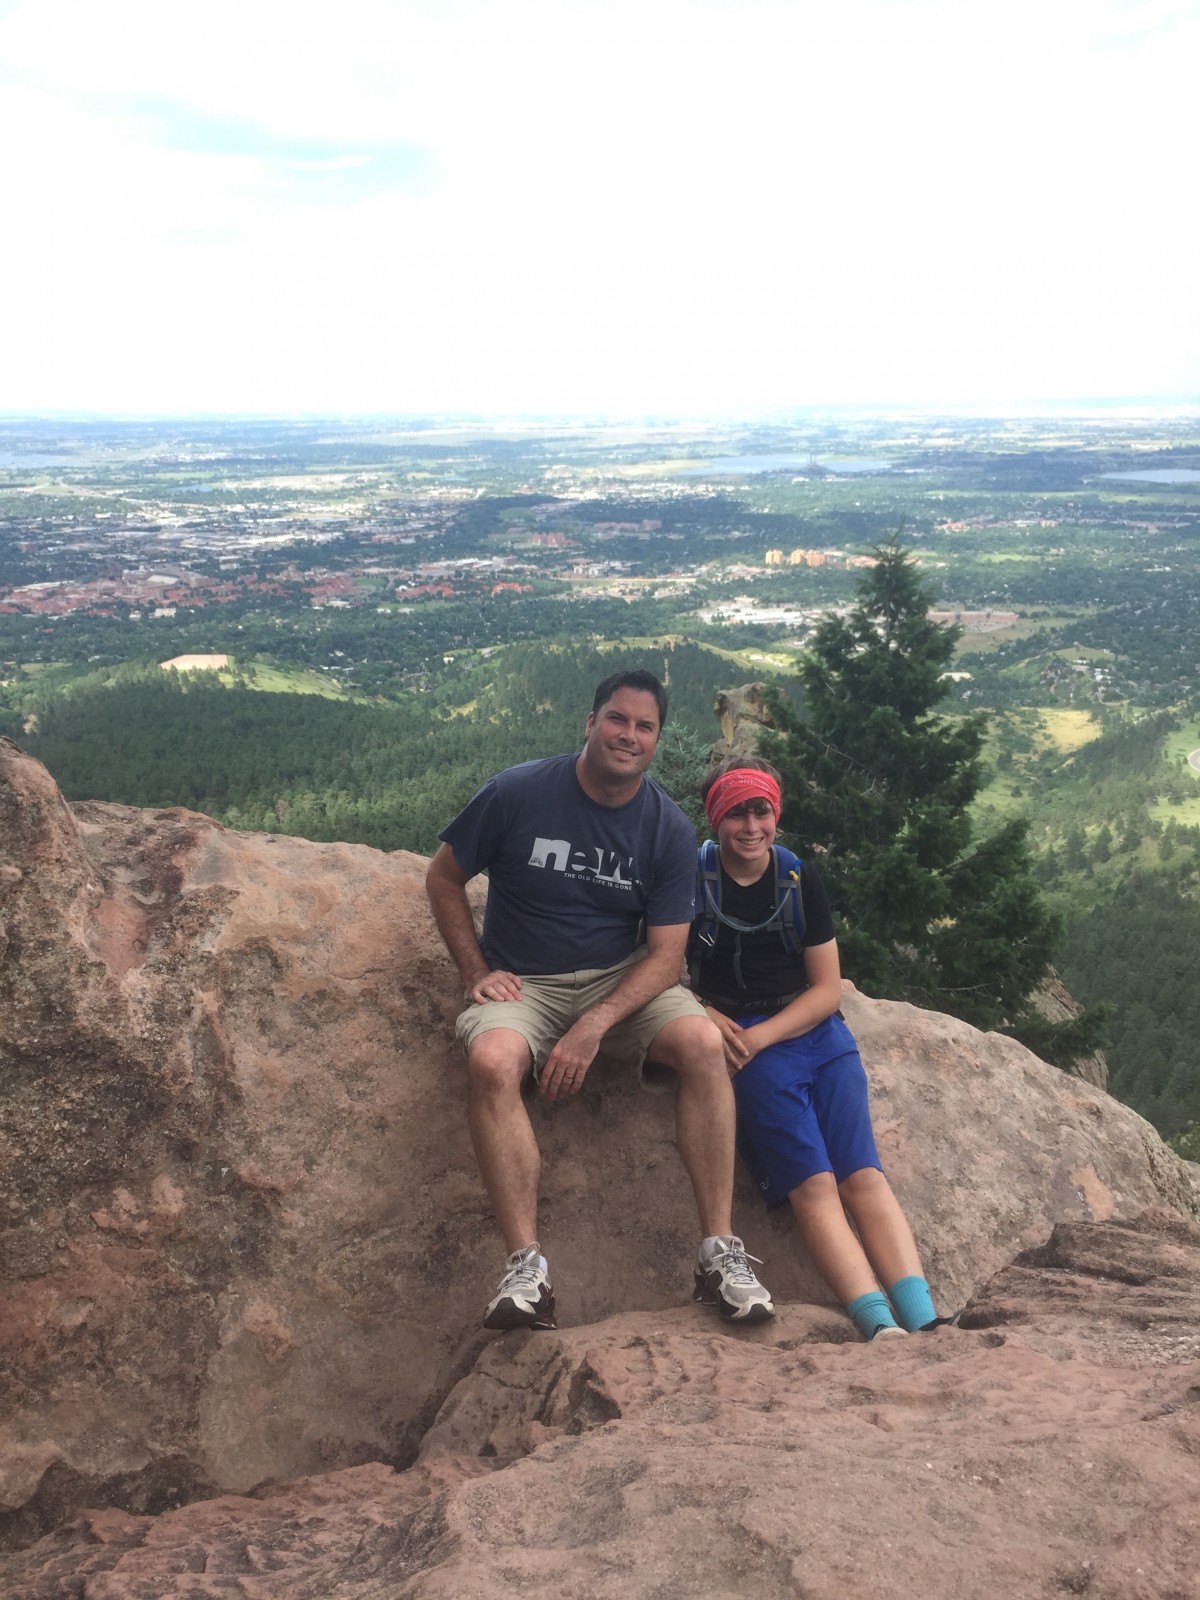 We did find a little time for some hiking.  This is Danny and I on top of the Flatirons in Boulder with CU (my alma mater) behind us. Go Buffs!